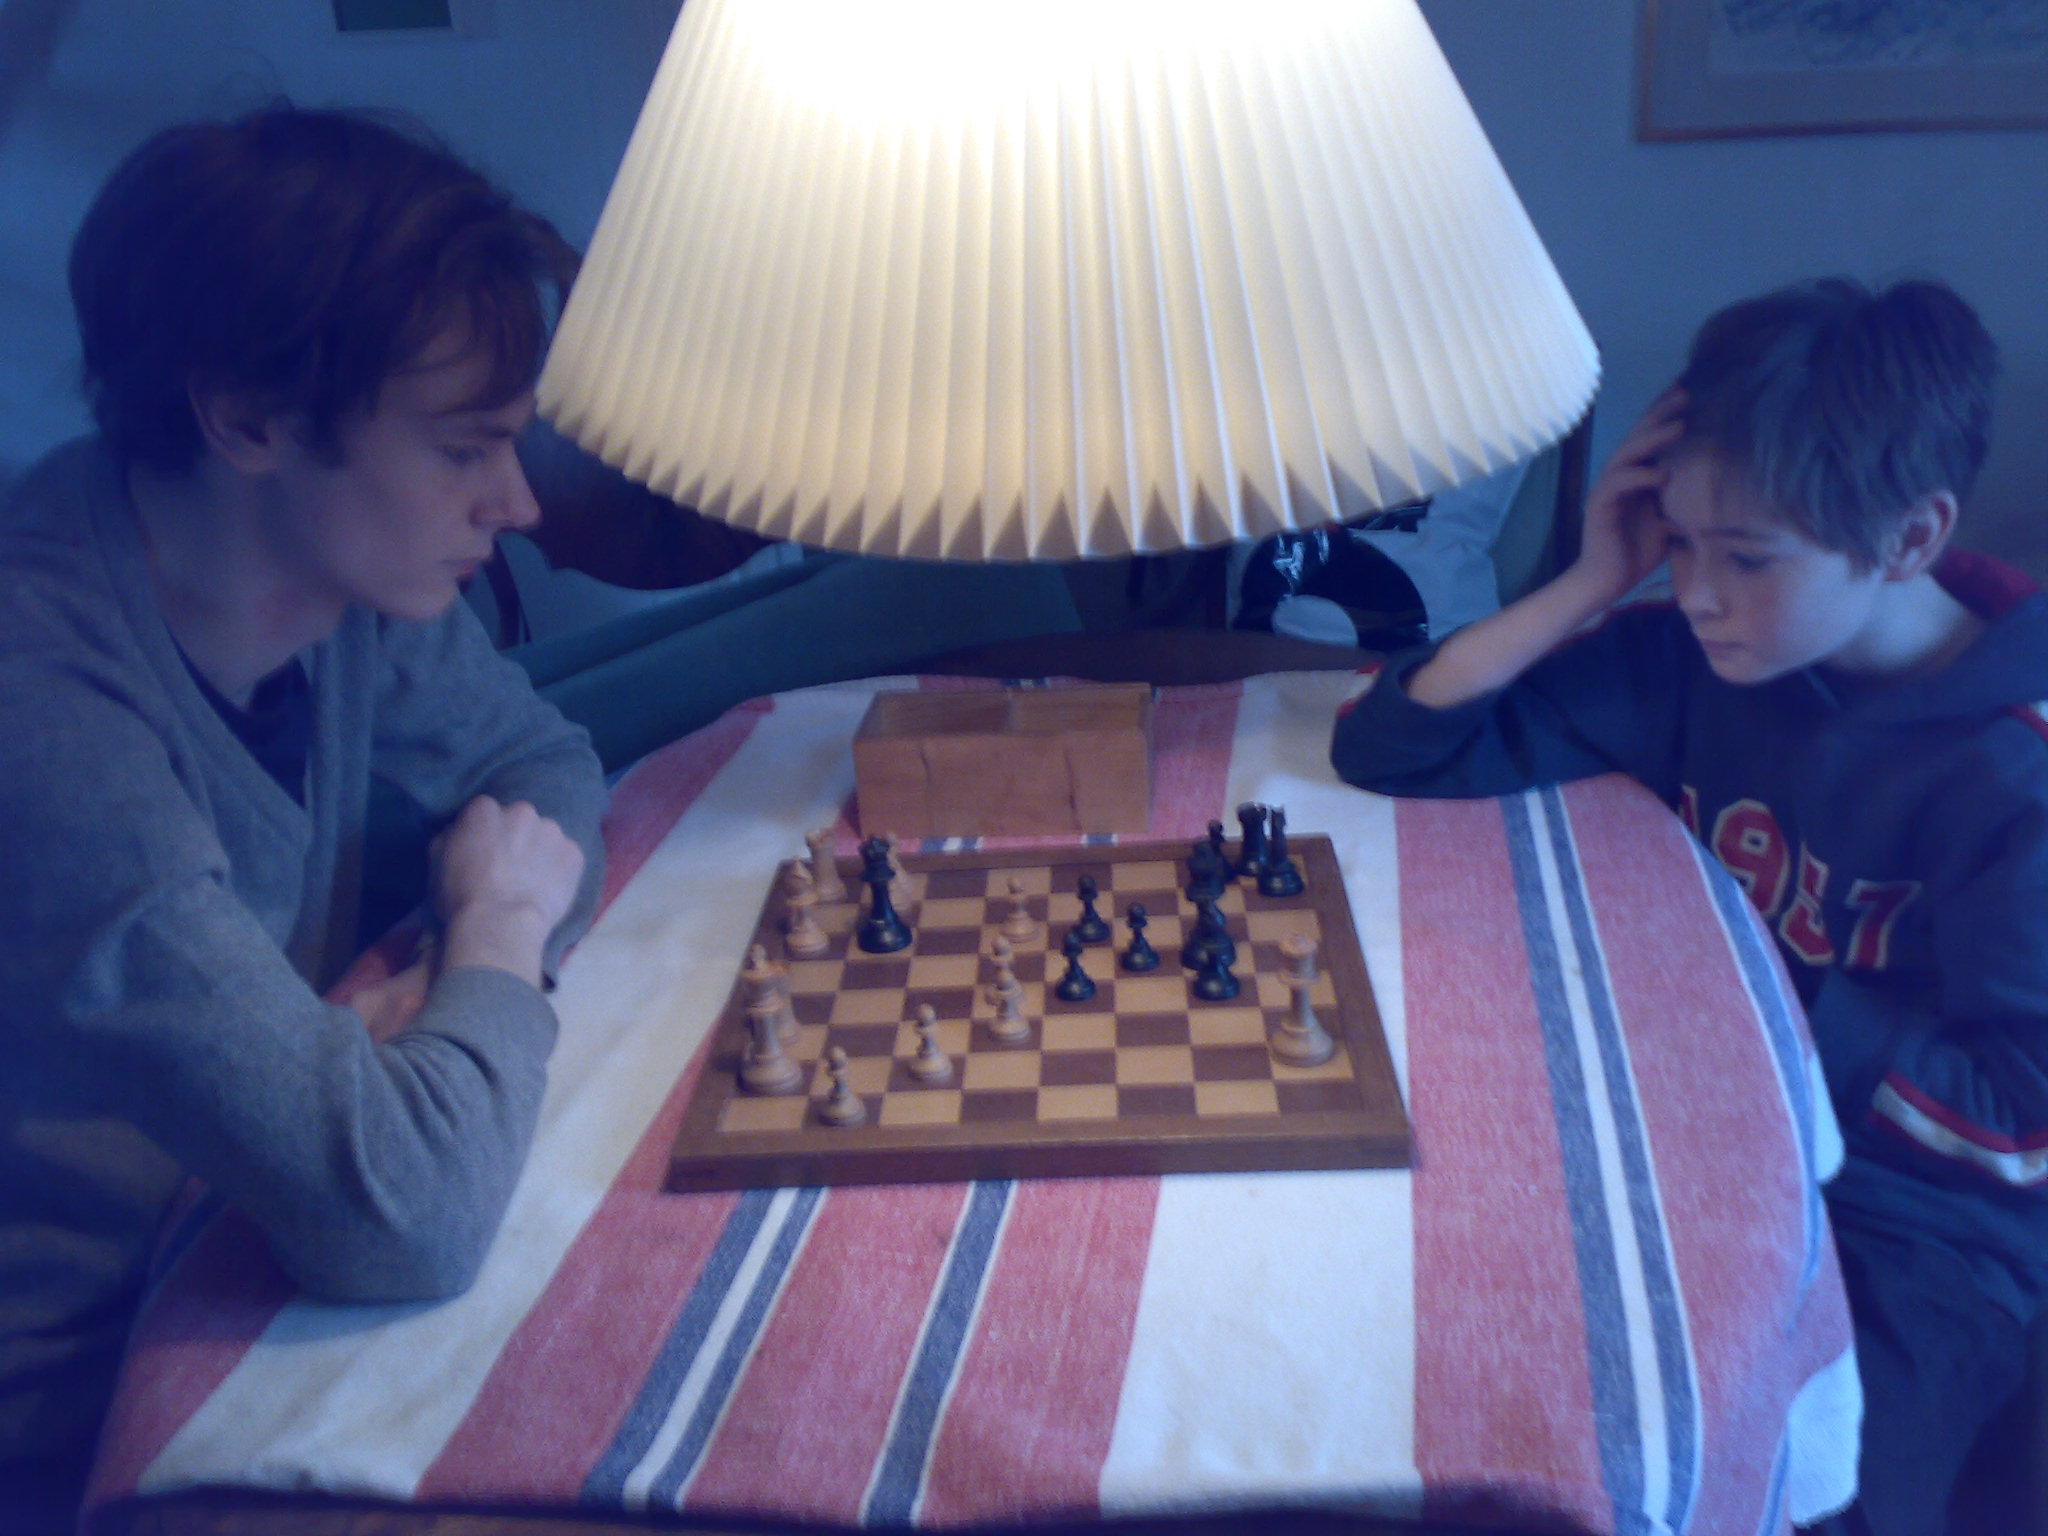 two boys sitting at a table and playing chess